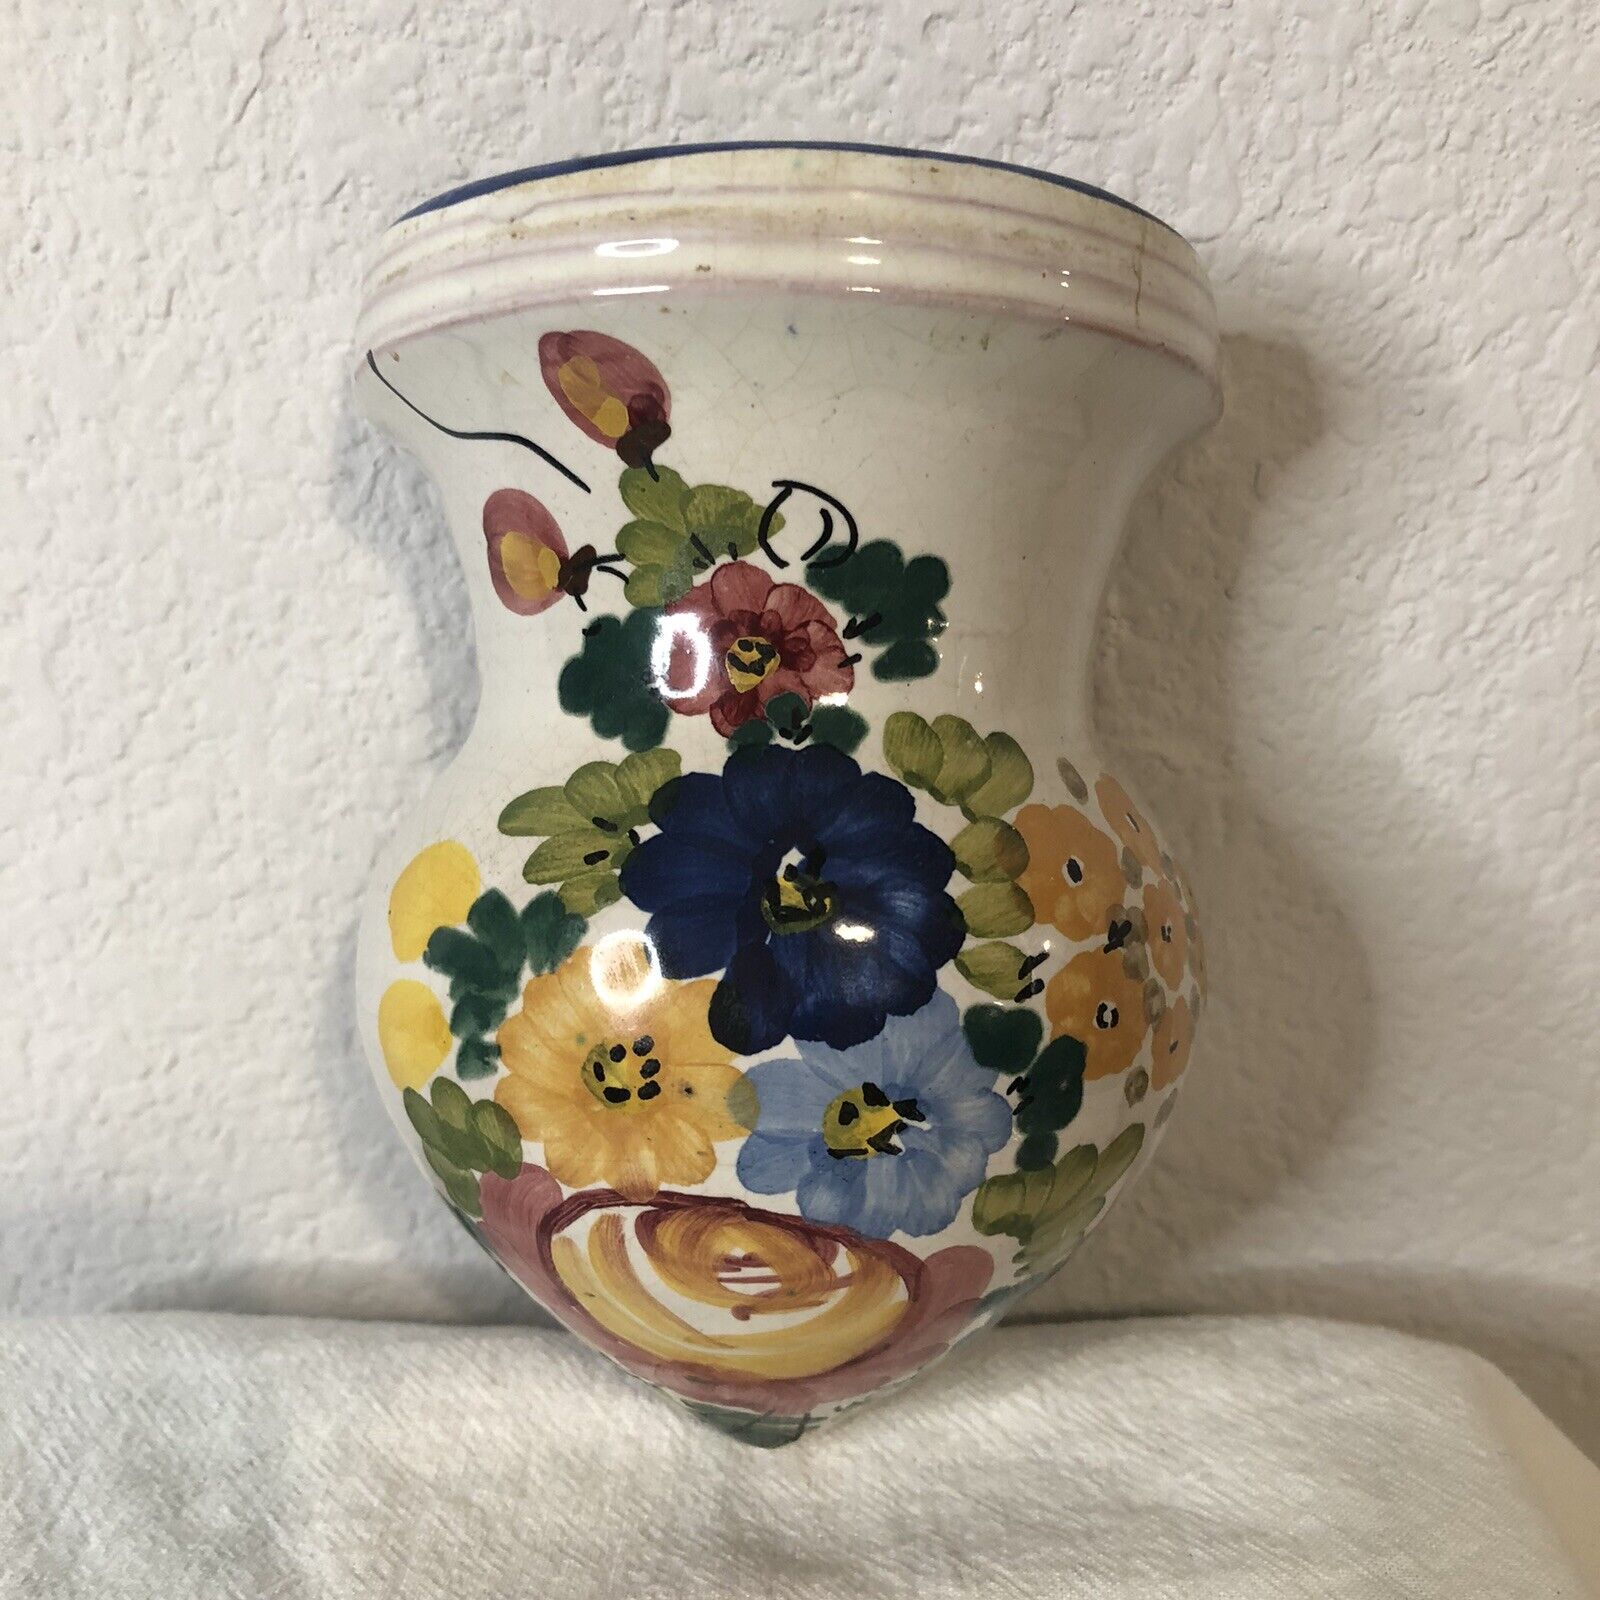 Vintage Small Ceramic Wall Hanging Pocket Pot Planter Floral Hand Painted Italy